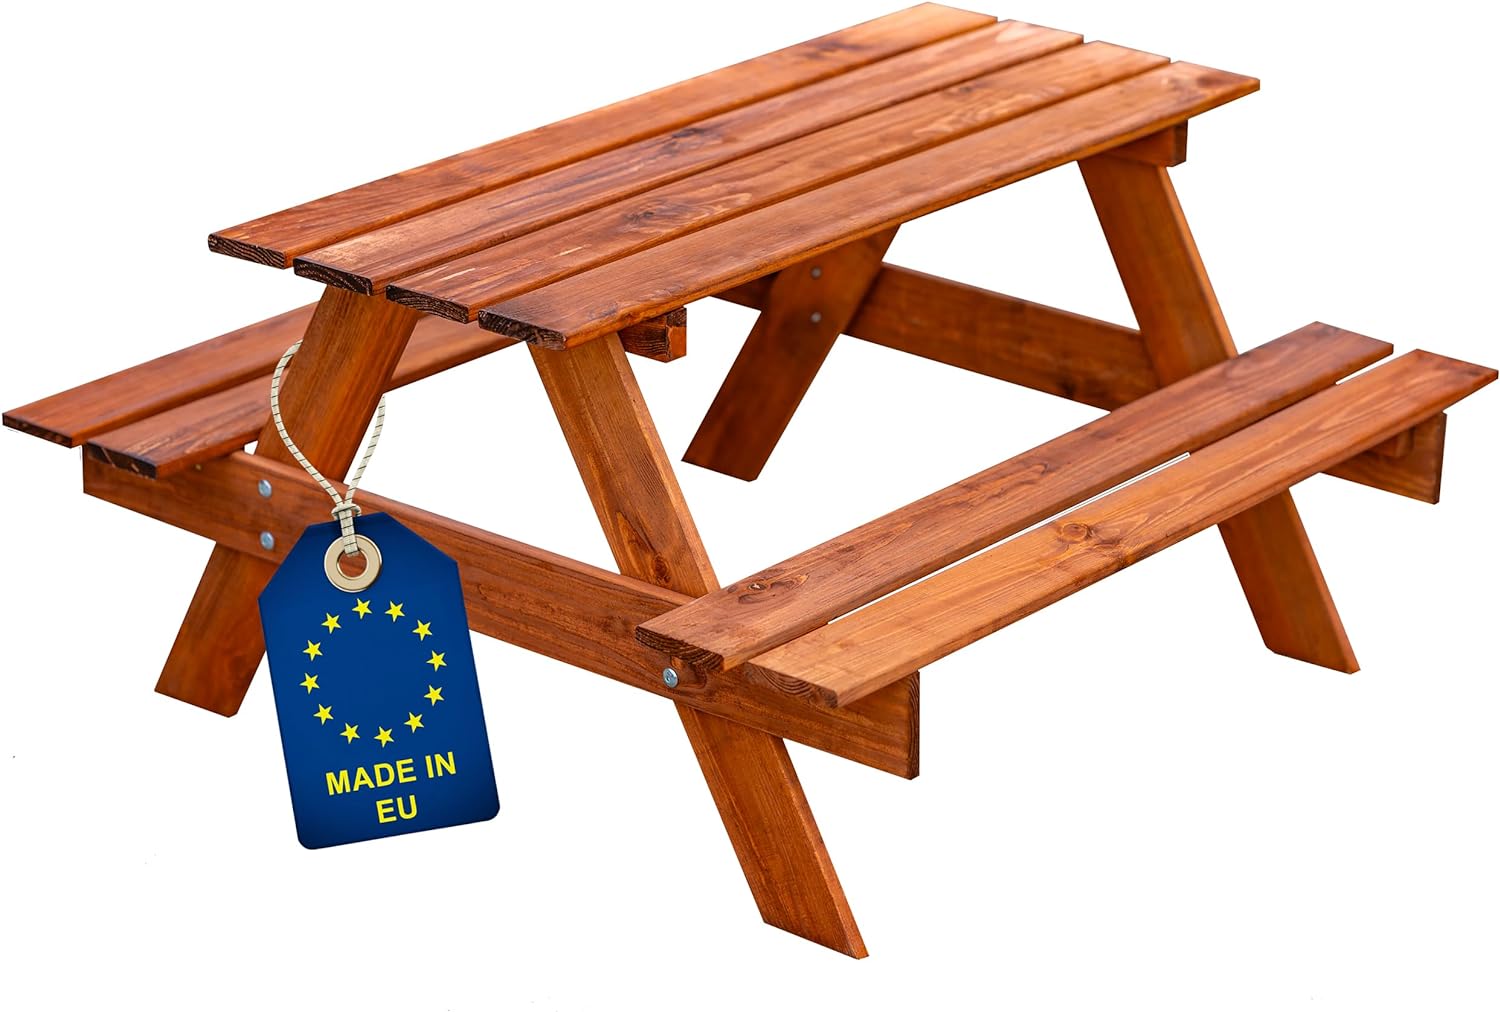 ITA children's seating set made of wood - children's picnic table with 2 benches